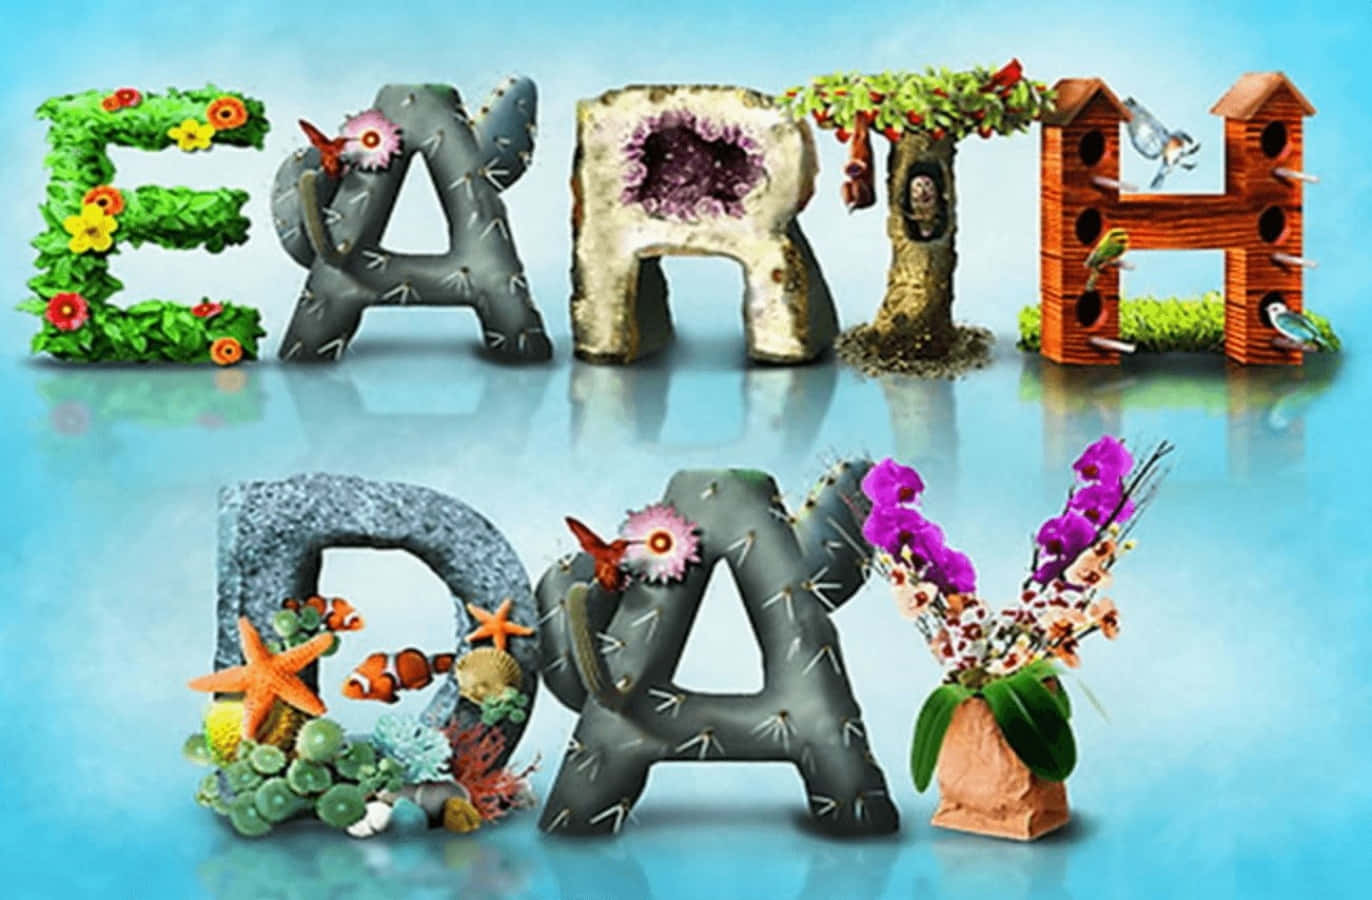 Celebrate Earth Day and ensure a healthy planet for future generations